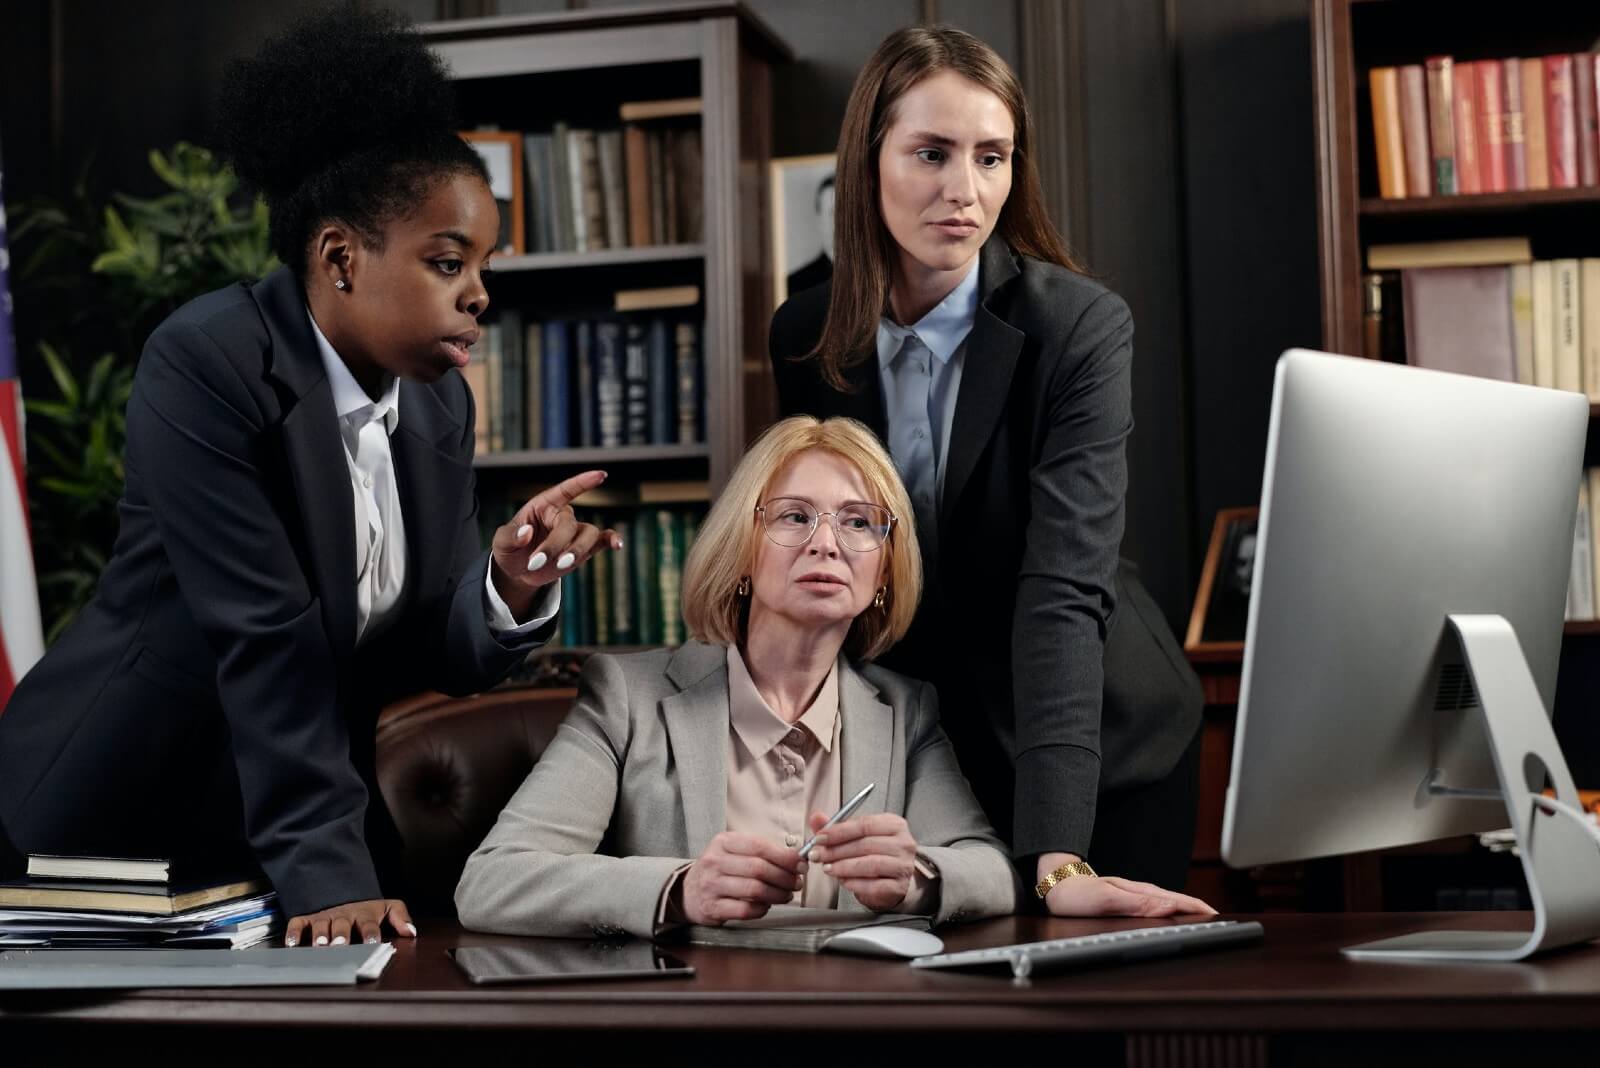 Women employment lawyers review case